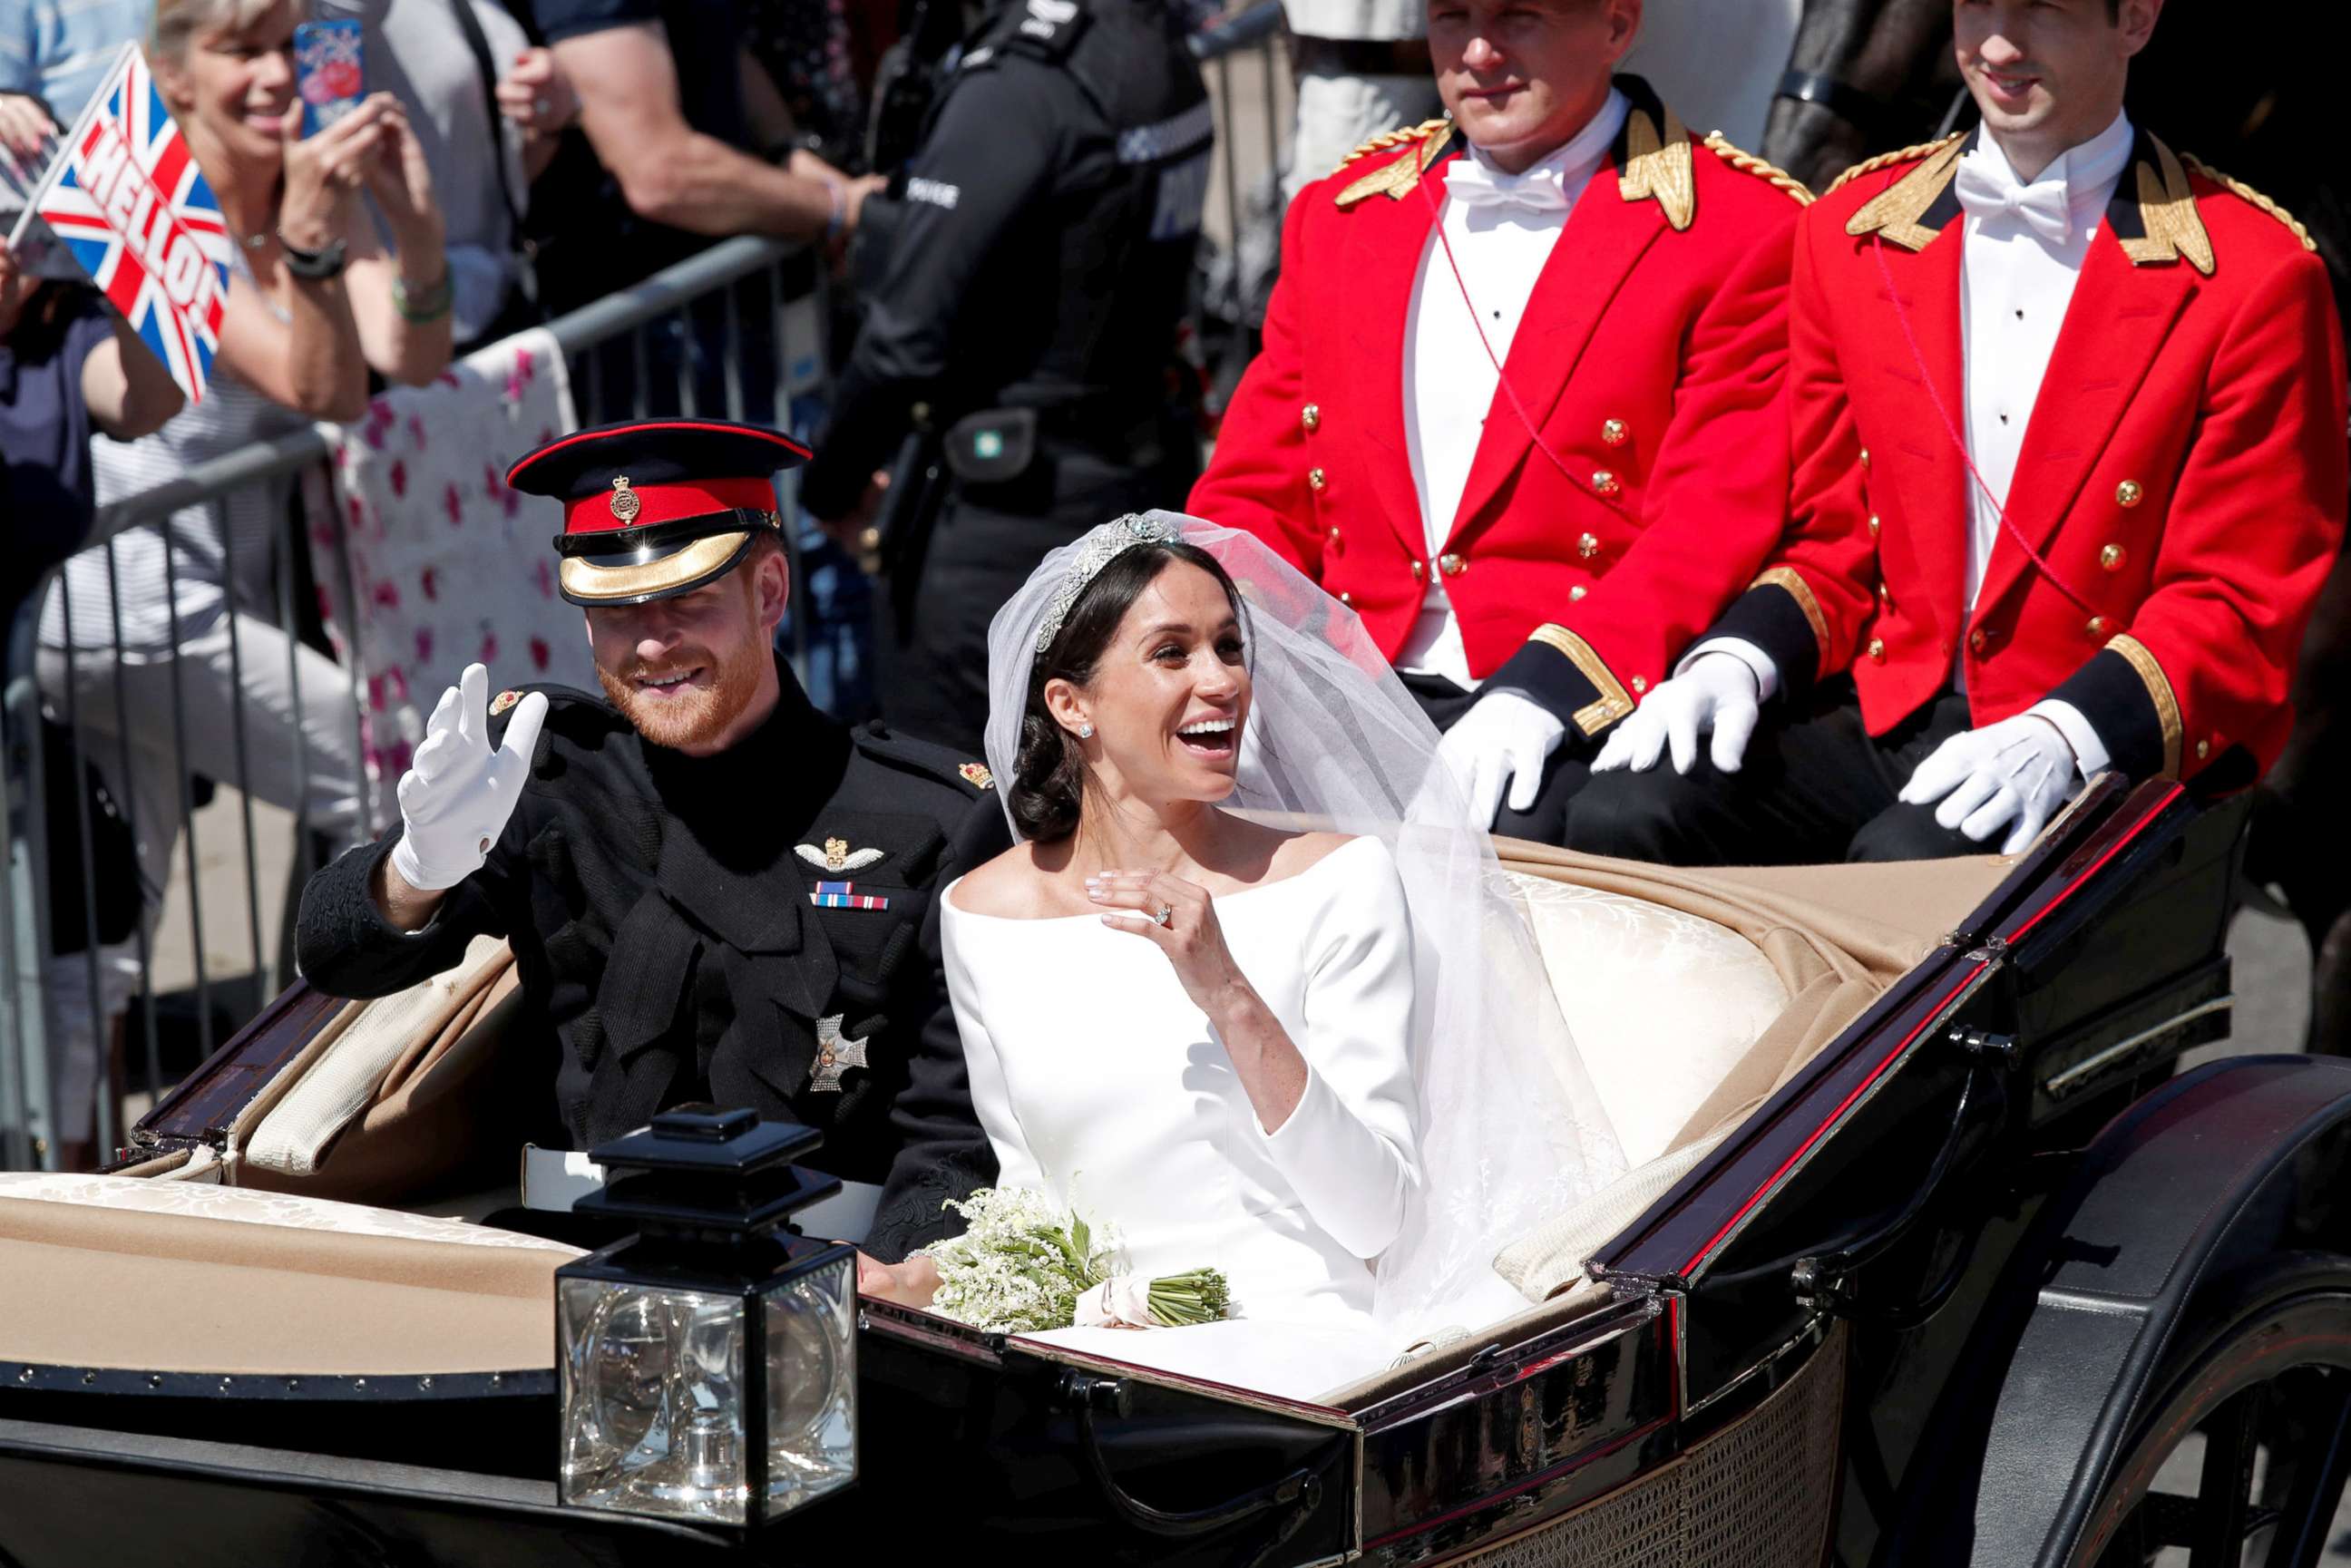 PHOTO: Prince Harry and his wife Meghan ride a horse-drawn carriage after their wedding ceremony at St George's Chapel in Windsor Castle in Windsor, May 19, 2018.